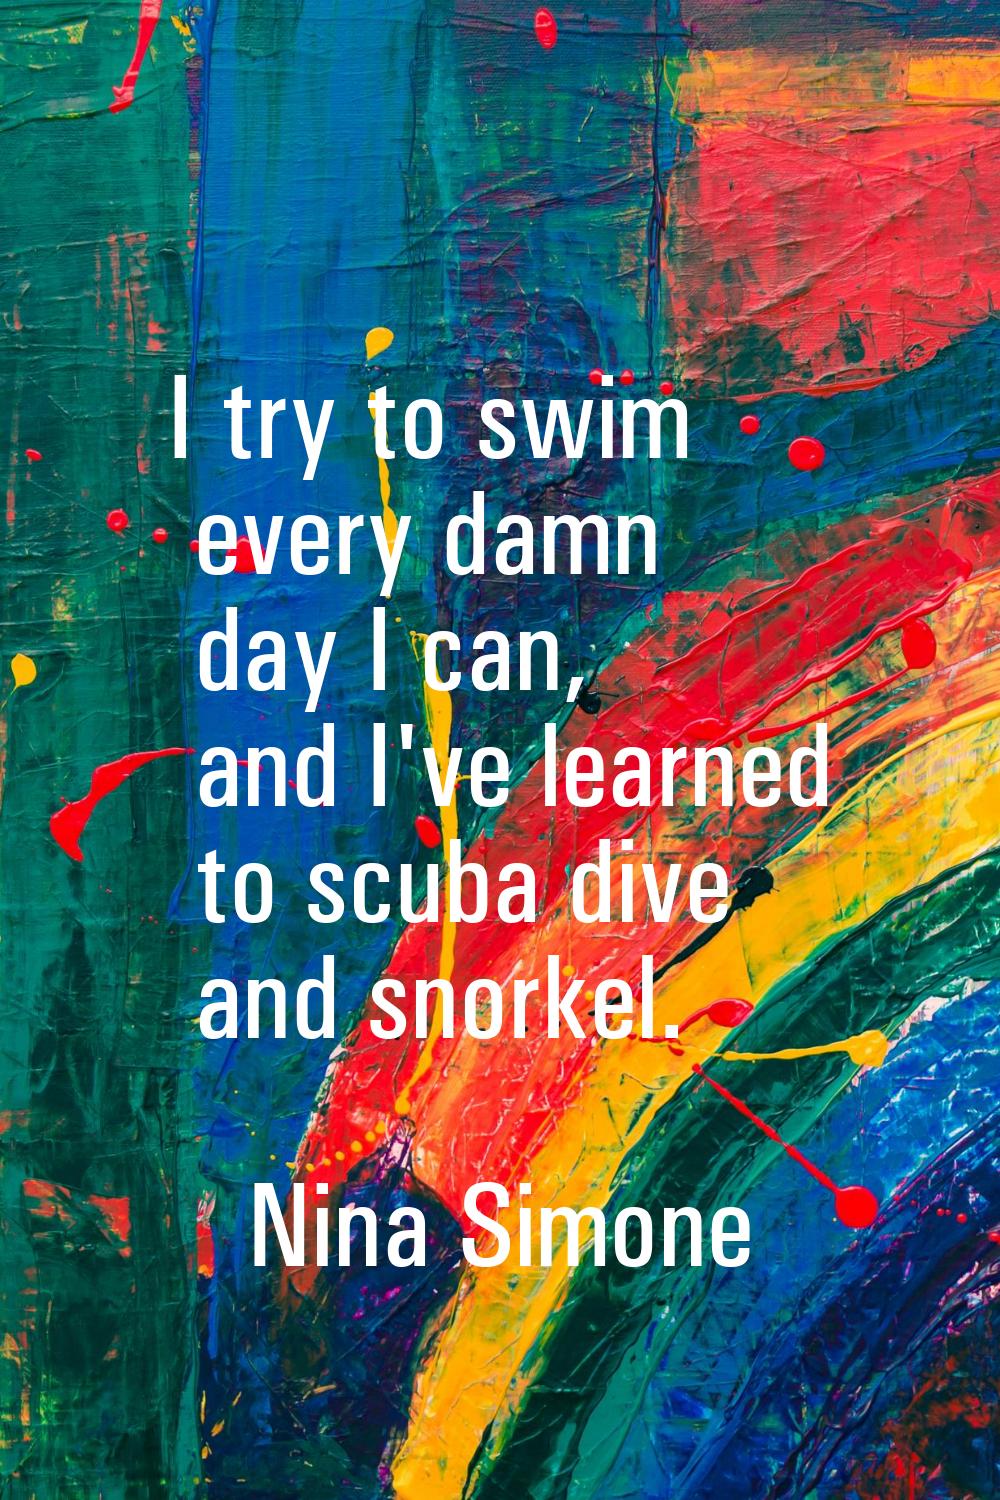 I try to swim every damn day I can, and I've learned to scuba dive and snorkel.